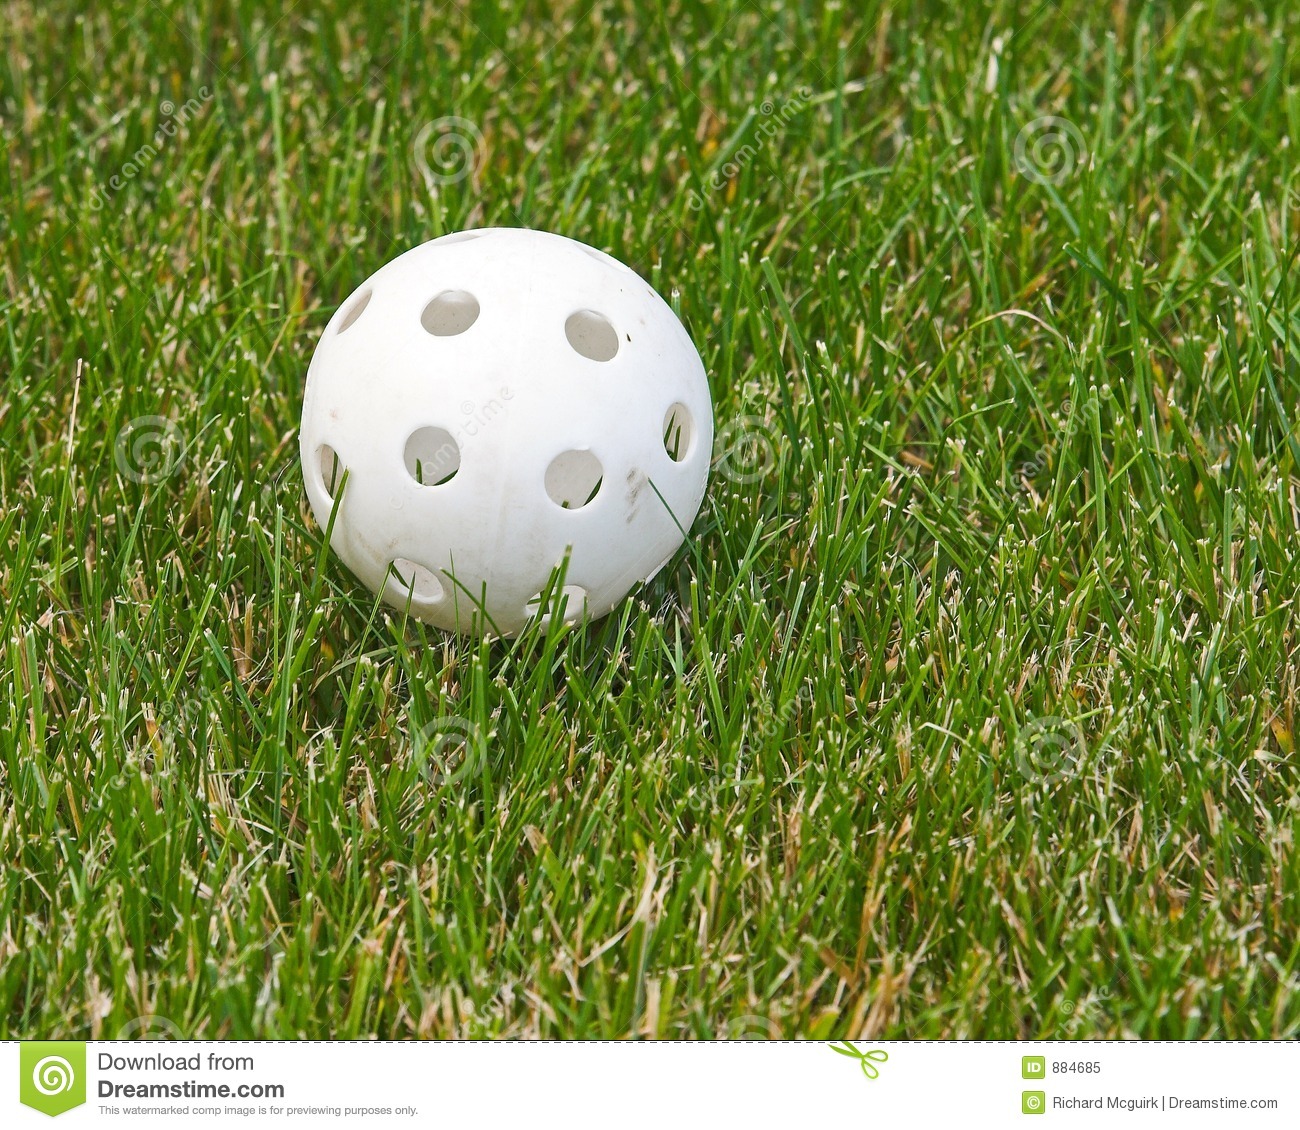 Wiffle Ball In The Grass Royalty Free Stock Photo   Image  884685